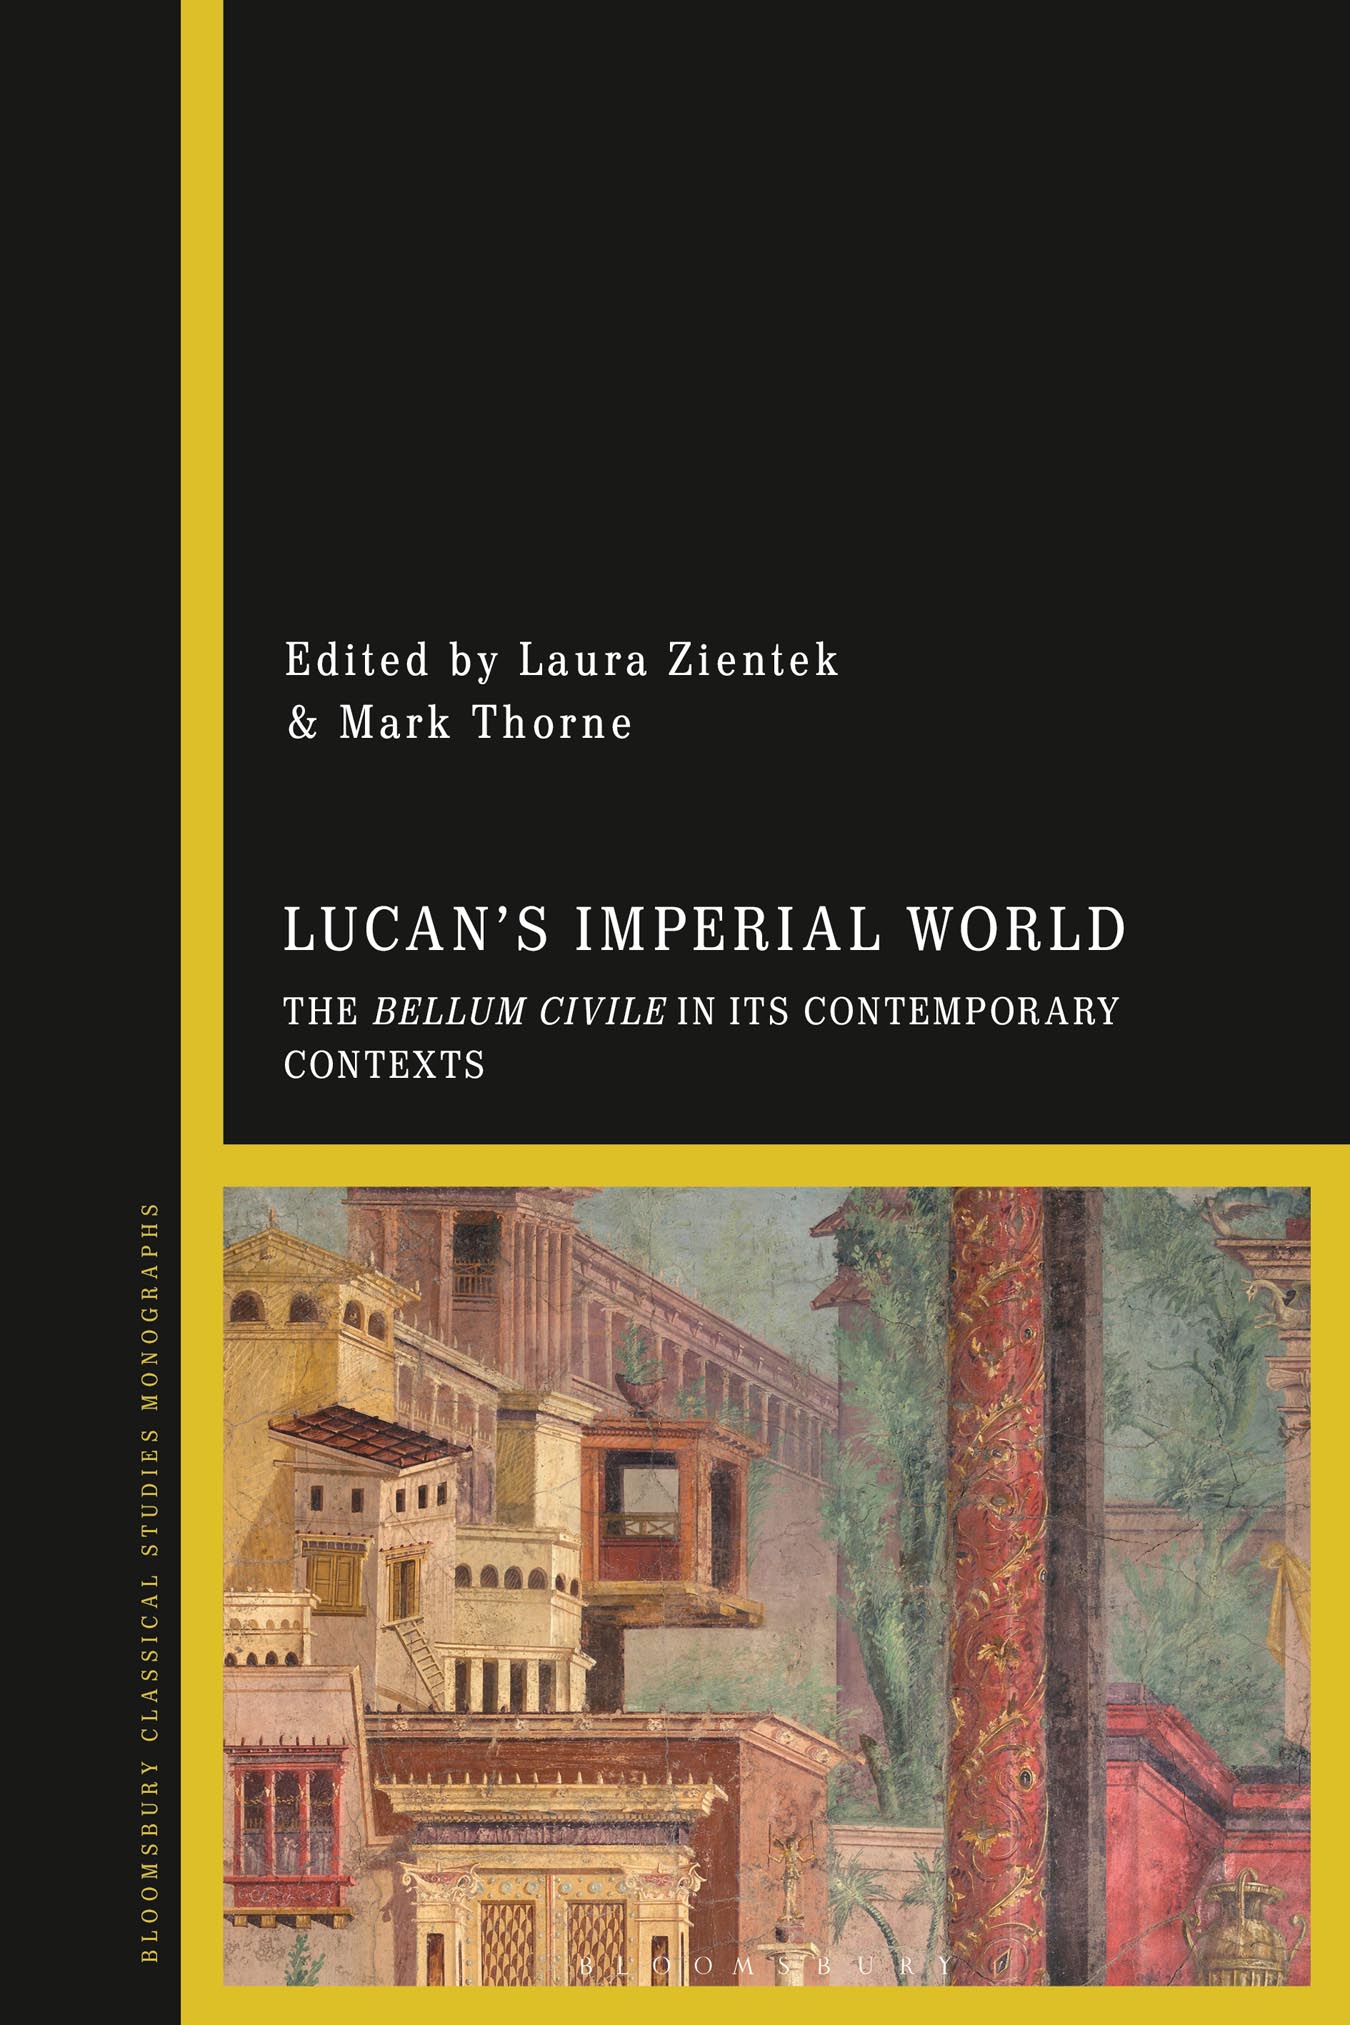 LUCANS IMPERIAL WORLD Also published by Bloomsbury ANTICIPATION AND - photo 1